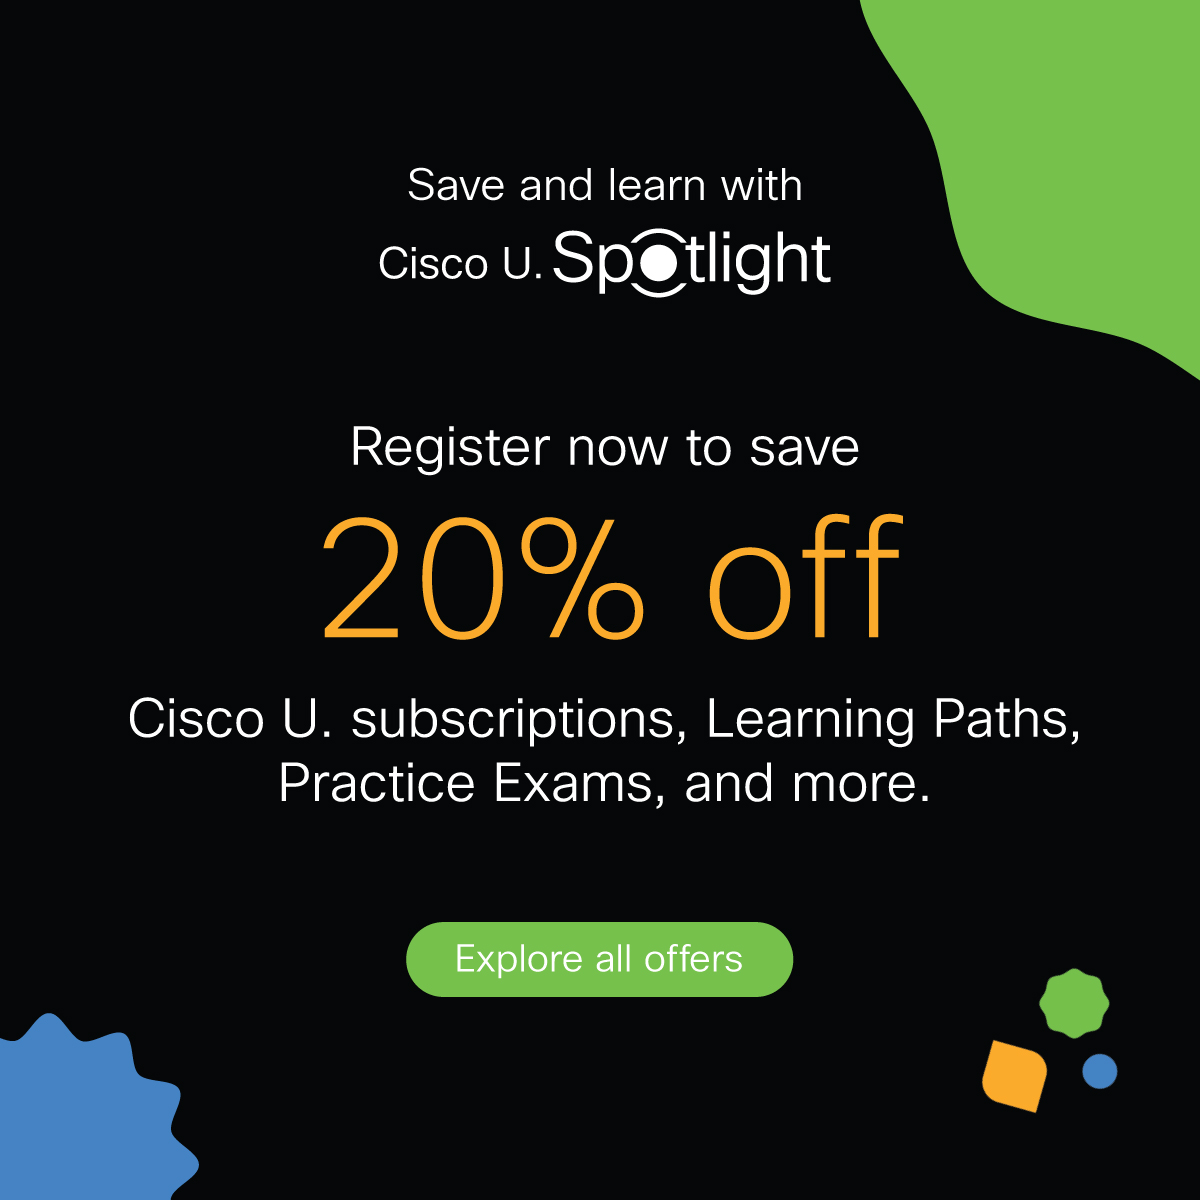 Make sure you register for #CiscoU. Spotlight *before* 5 p.m. PT TODAY for: 

• 20% off 🏷️ Learning Paths · Practice Exams · Cisco U. Subscriptions
• Access to all sessions on-demand, on your own schedule

Don't miss out: cs.co/6019bq8NS

#CiscoU #CiscoCert #CCNA #CCNP